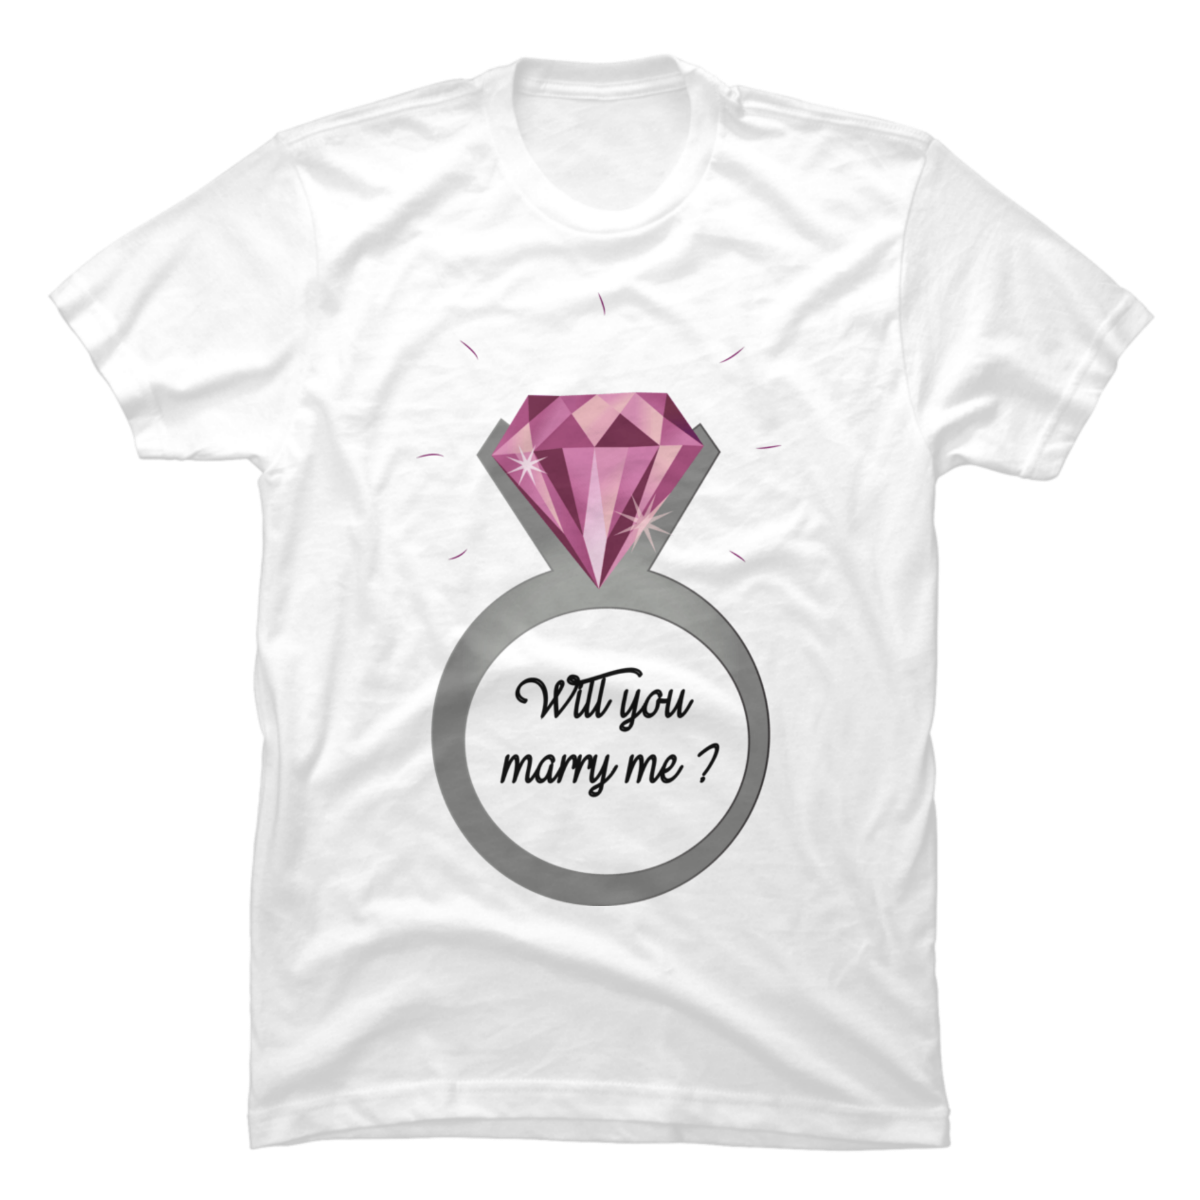 will you marry me t shirts